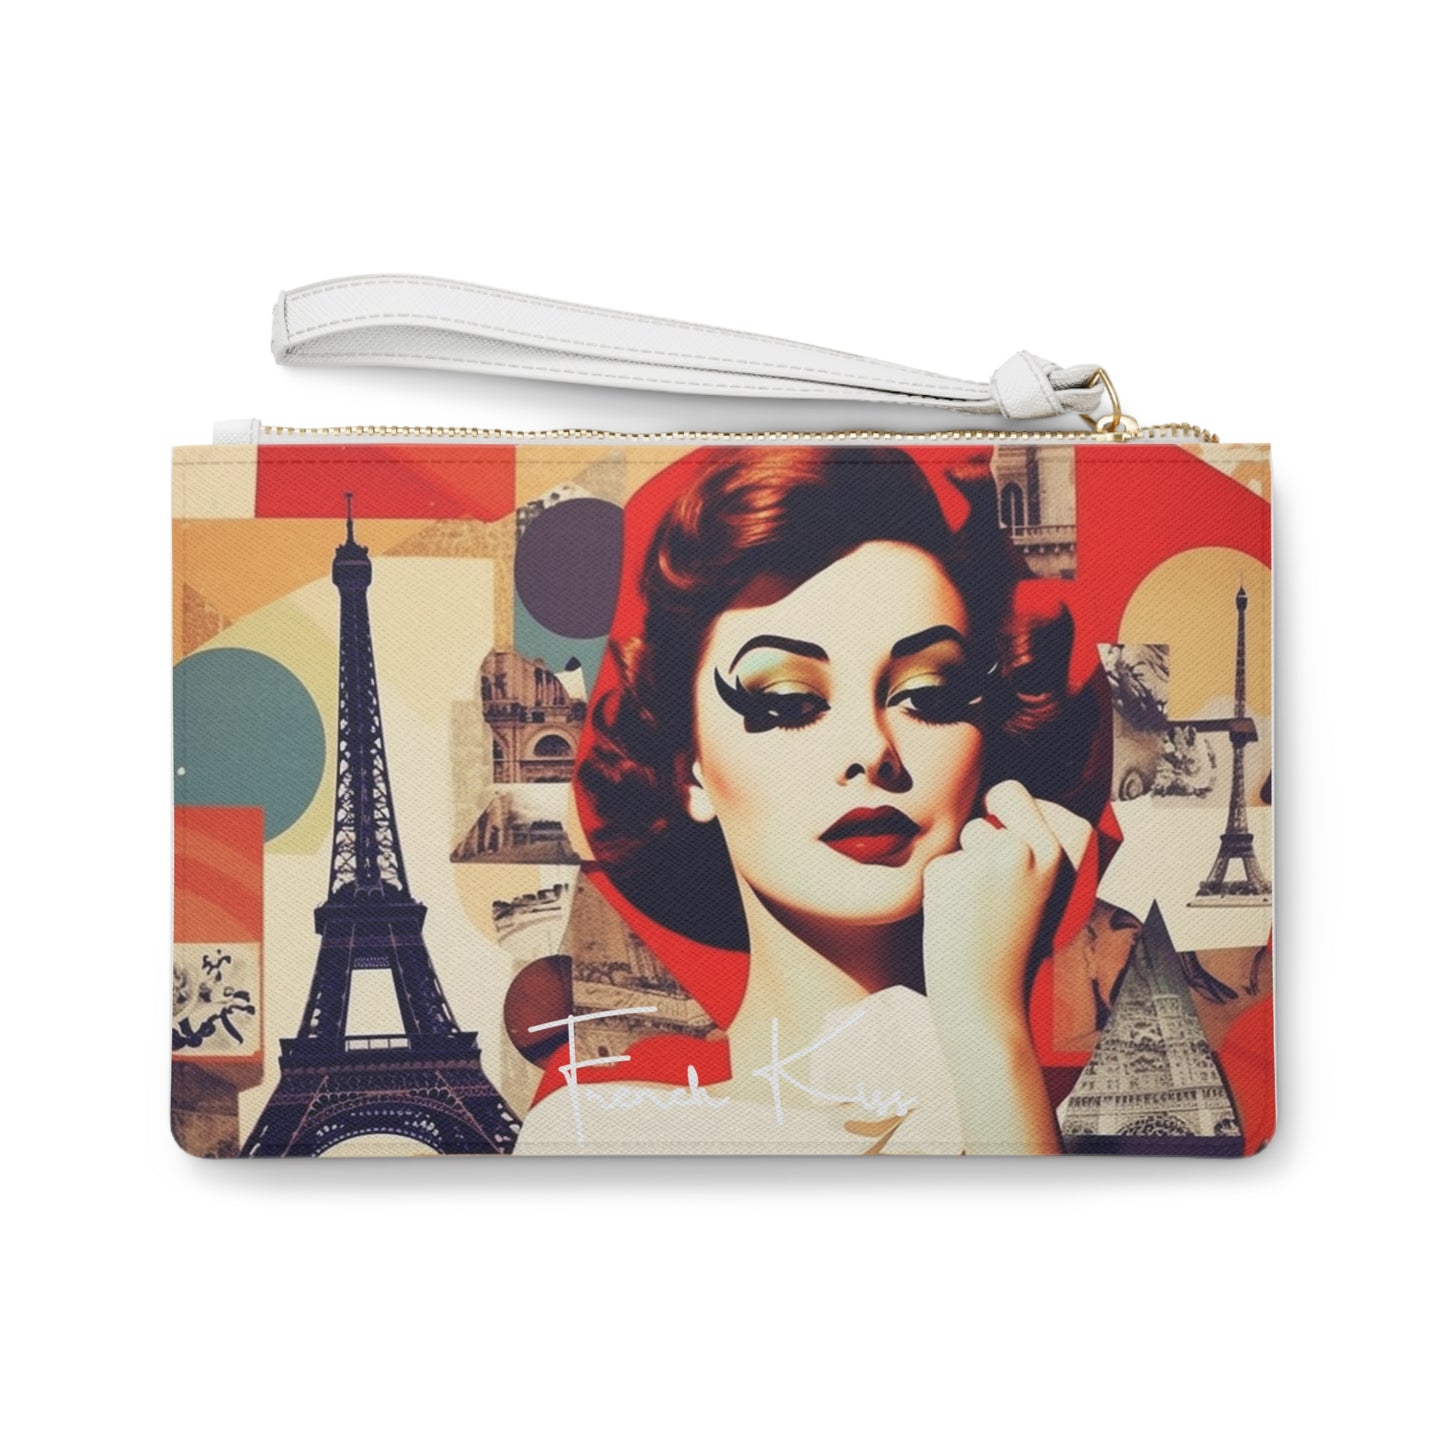 PARIS AMOUR French Kiss Pop Art, Sexy, Sassy CLUTCH Bag, France Couture, Travel, Fashion, Luxury, Chic French designer, must have gift item